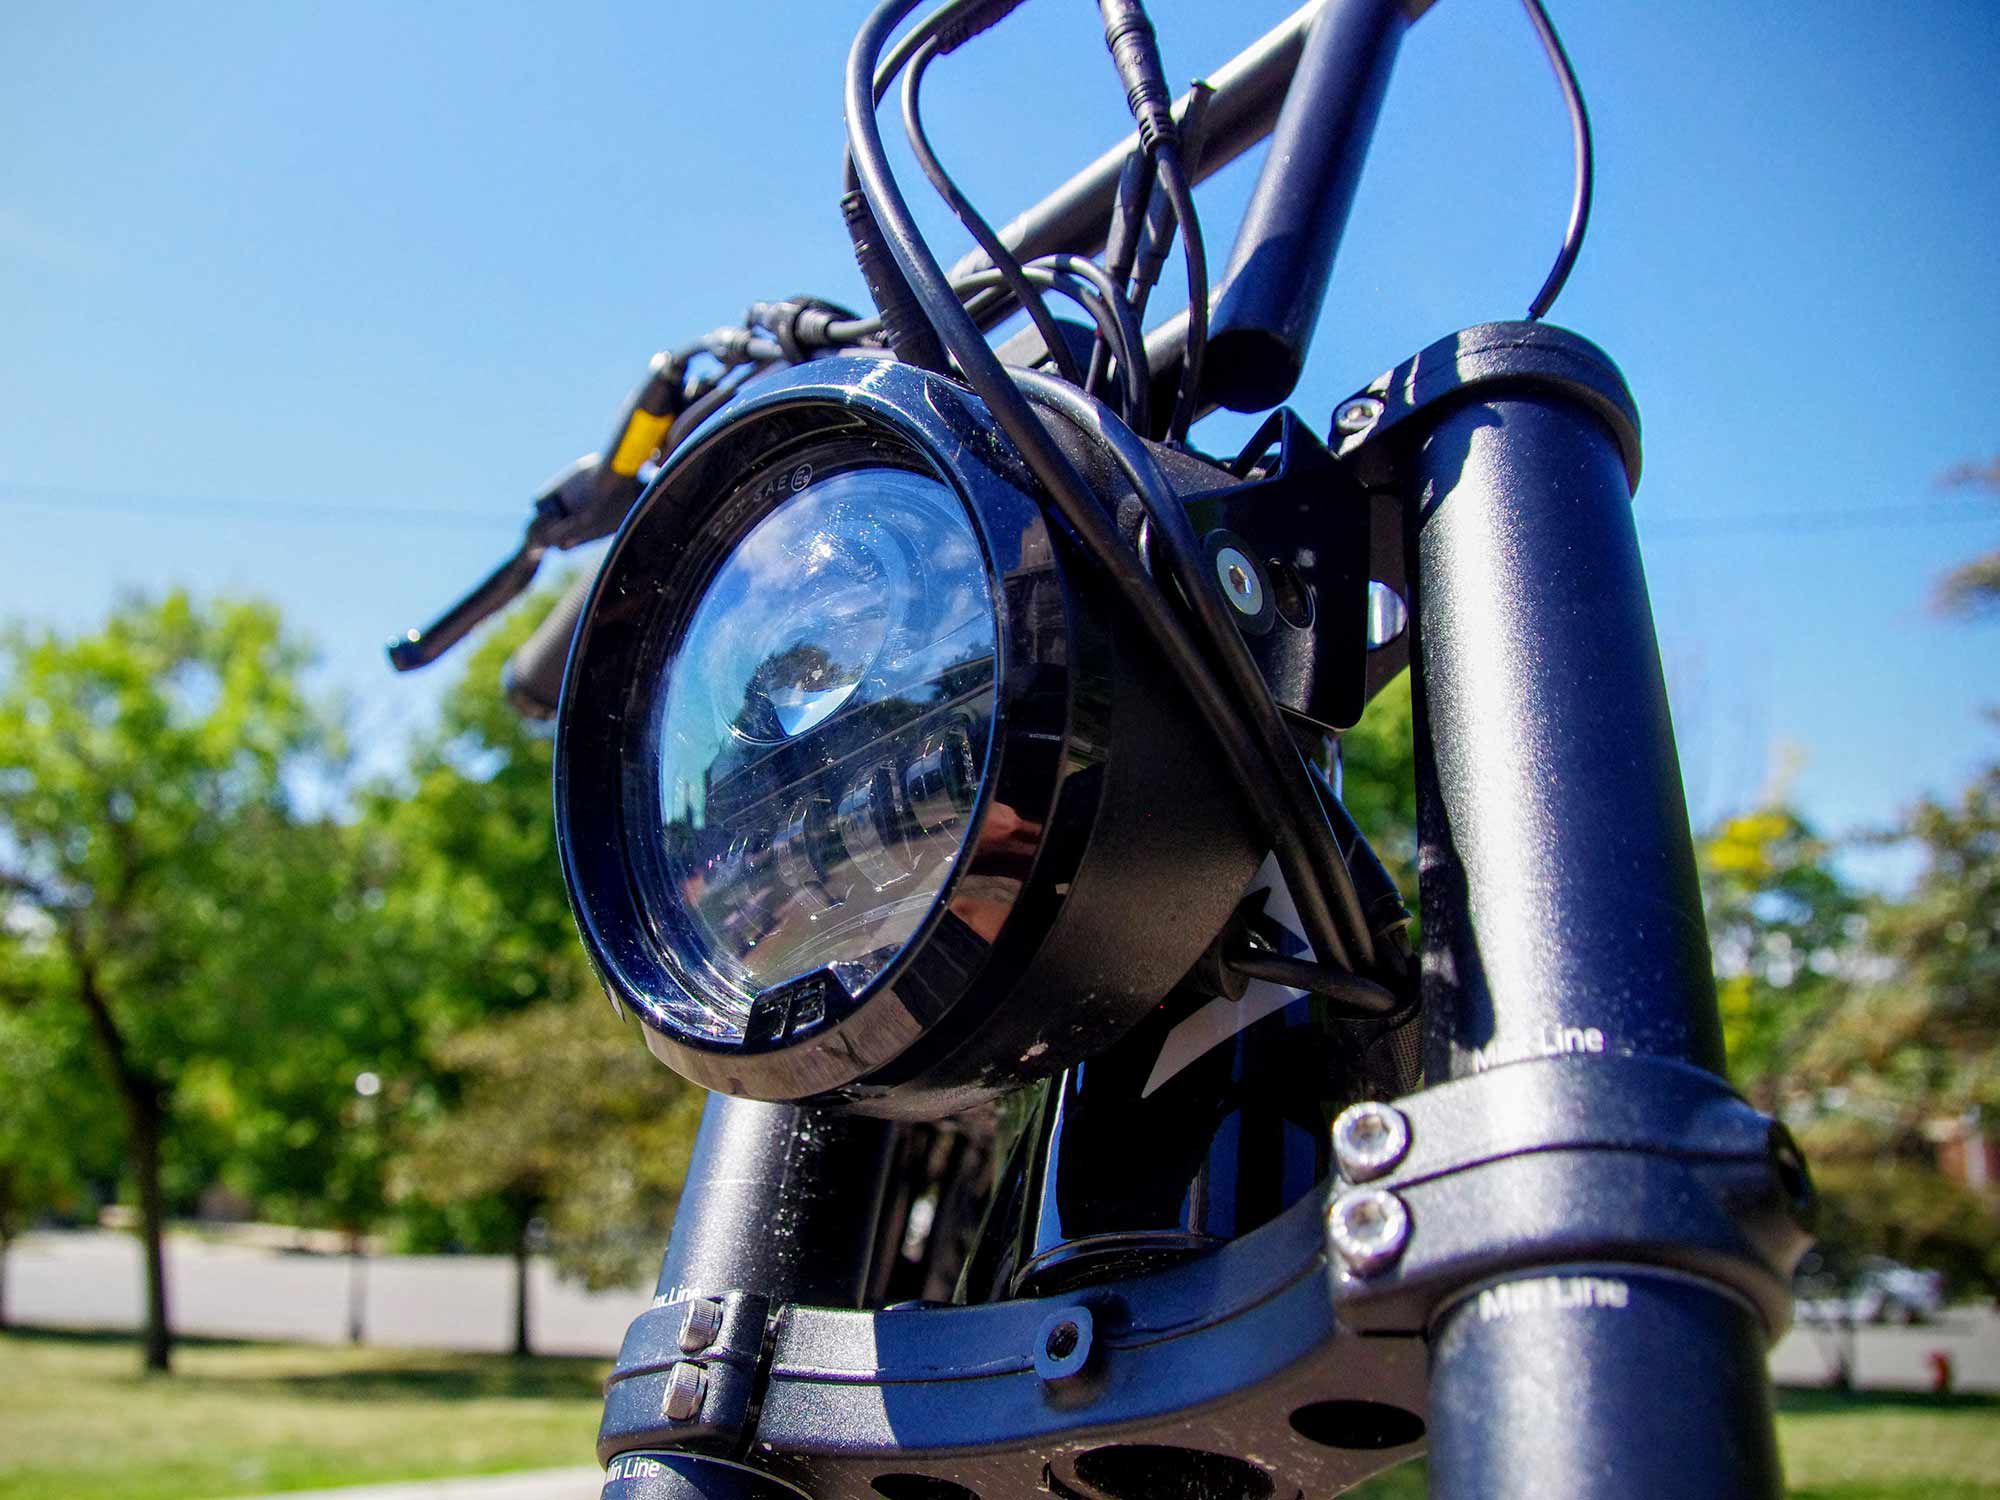 A 1,100-lumen LED headlight throws a nice beam, especially on streets with burned-out streetlights.